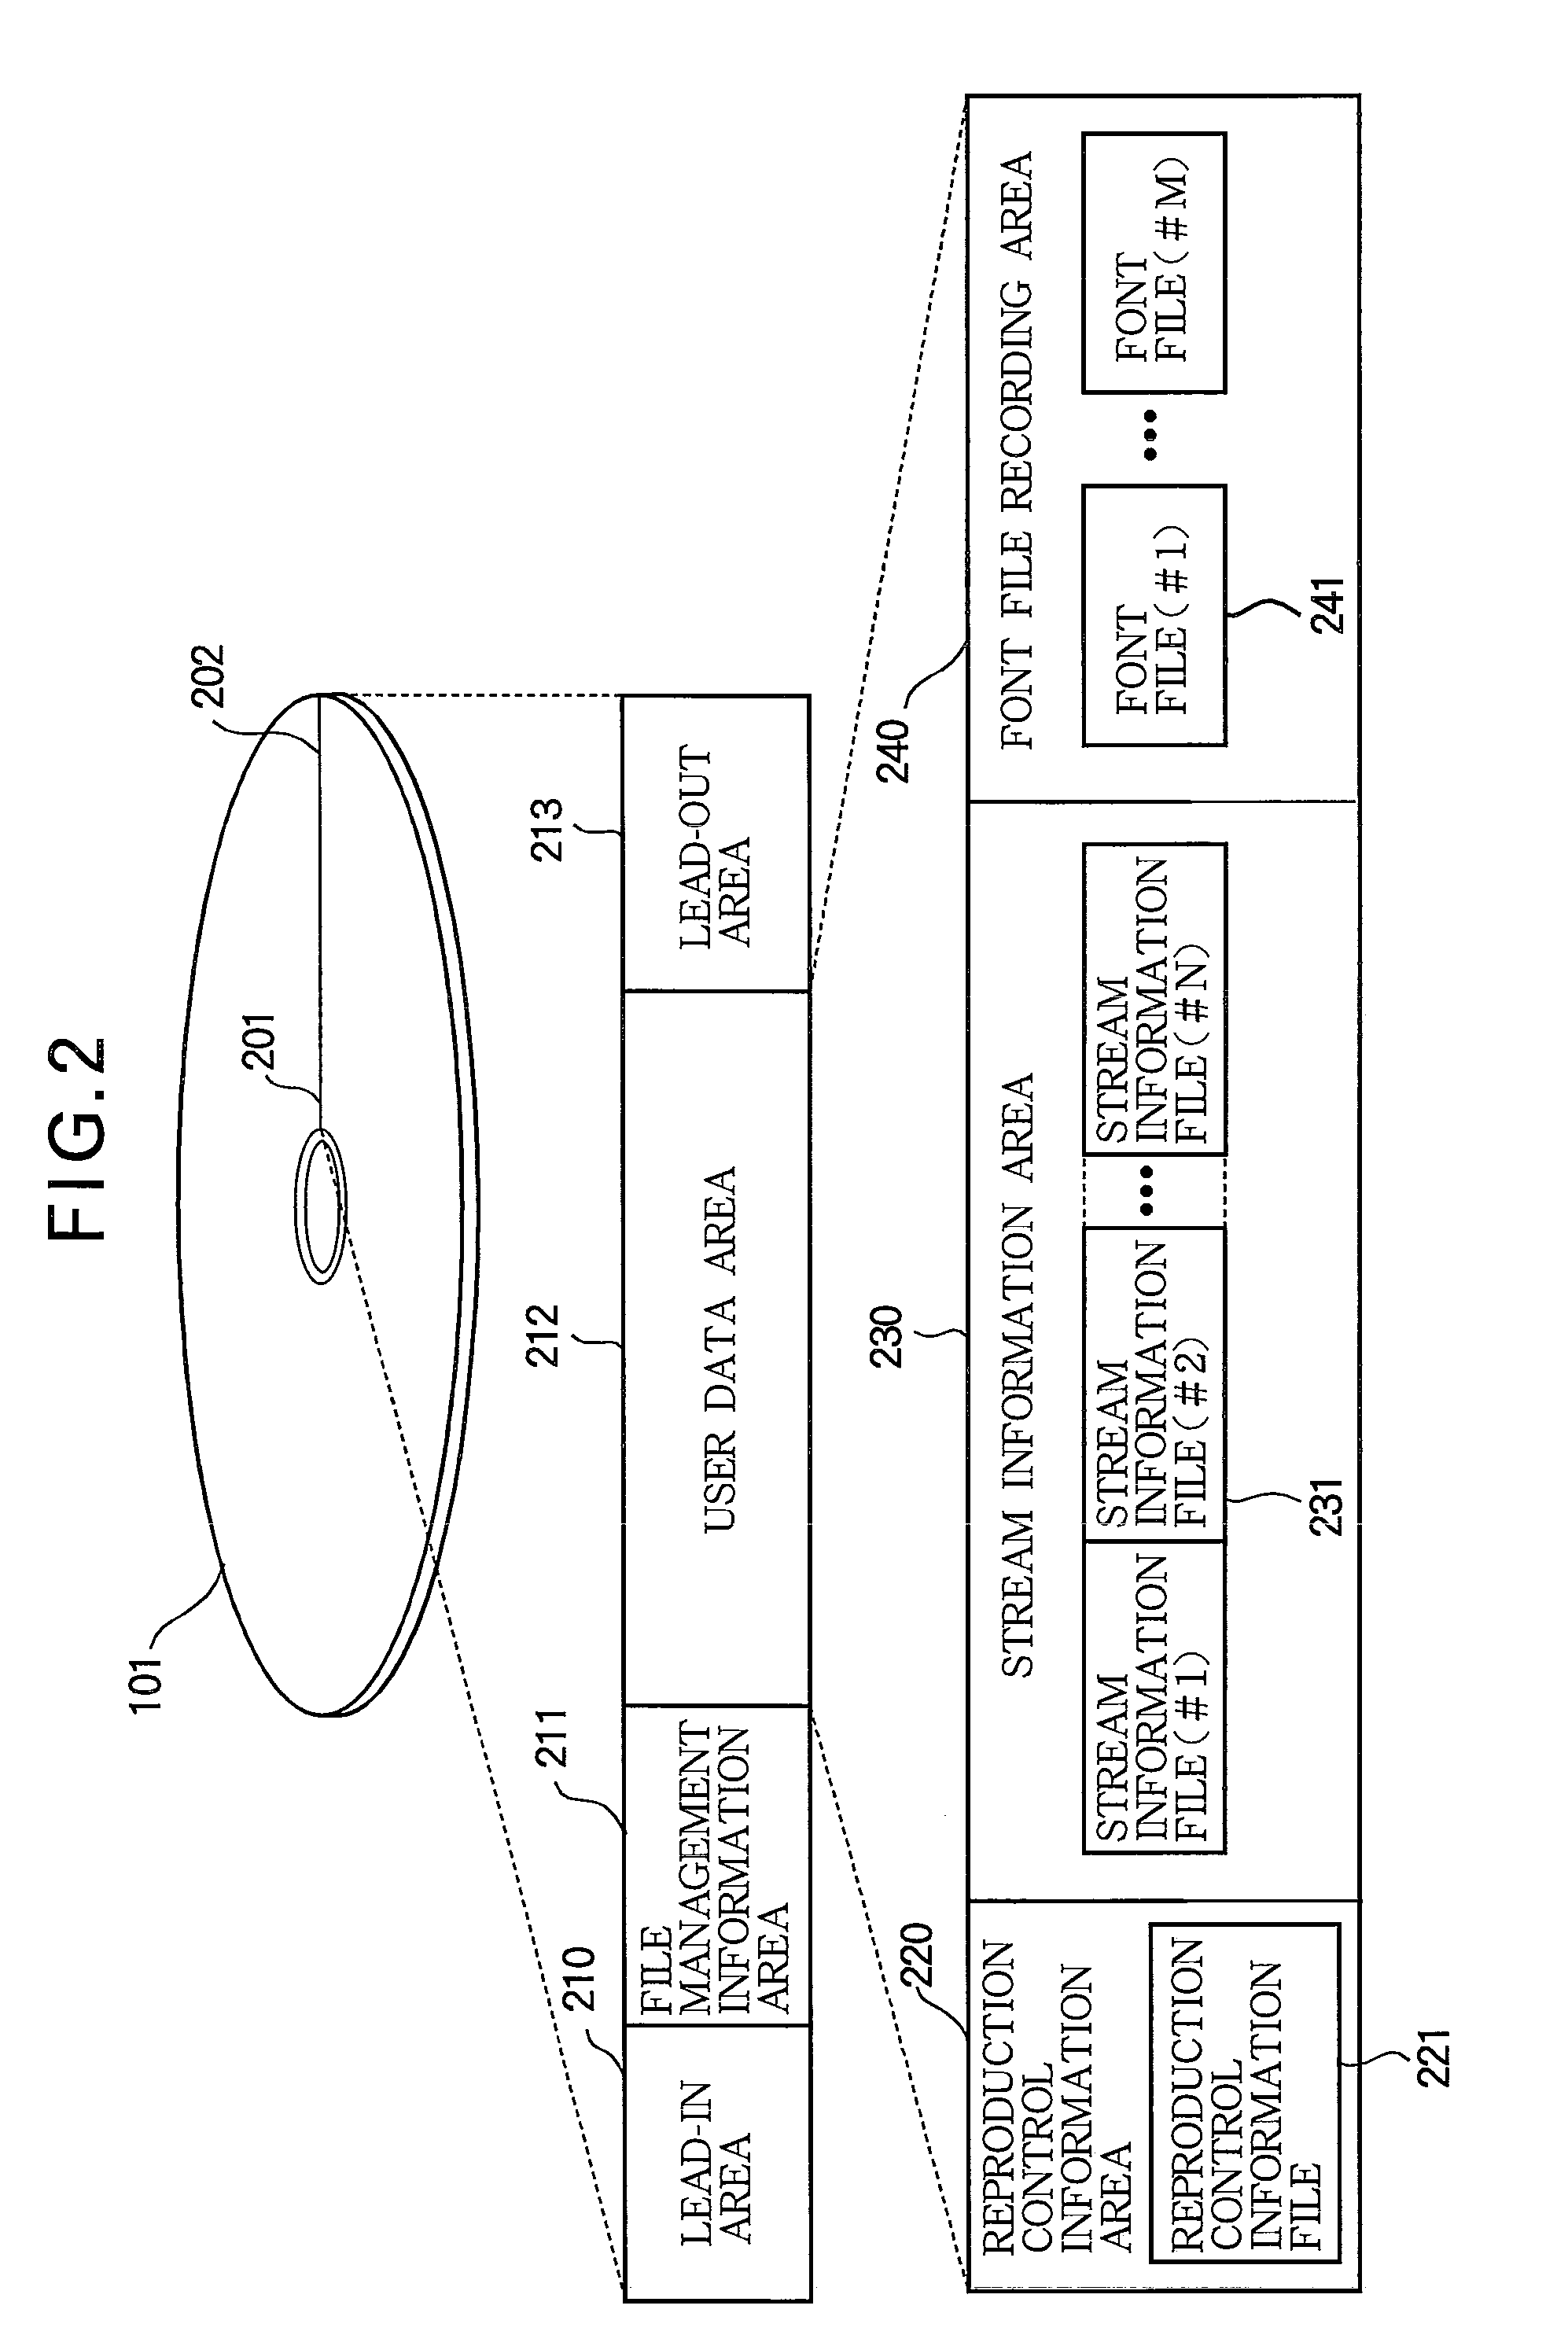 Video reproducing apparatus and method